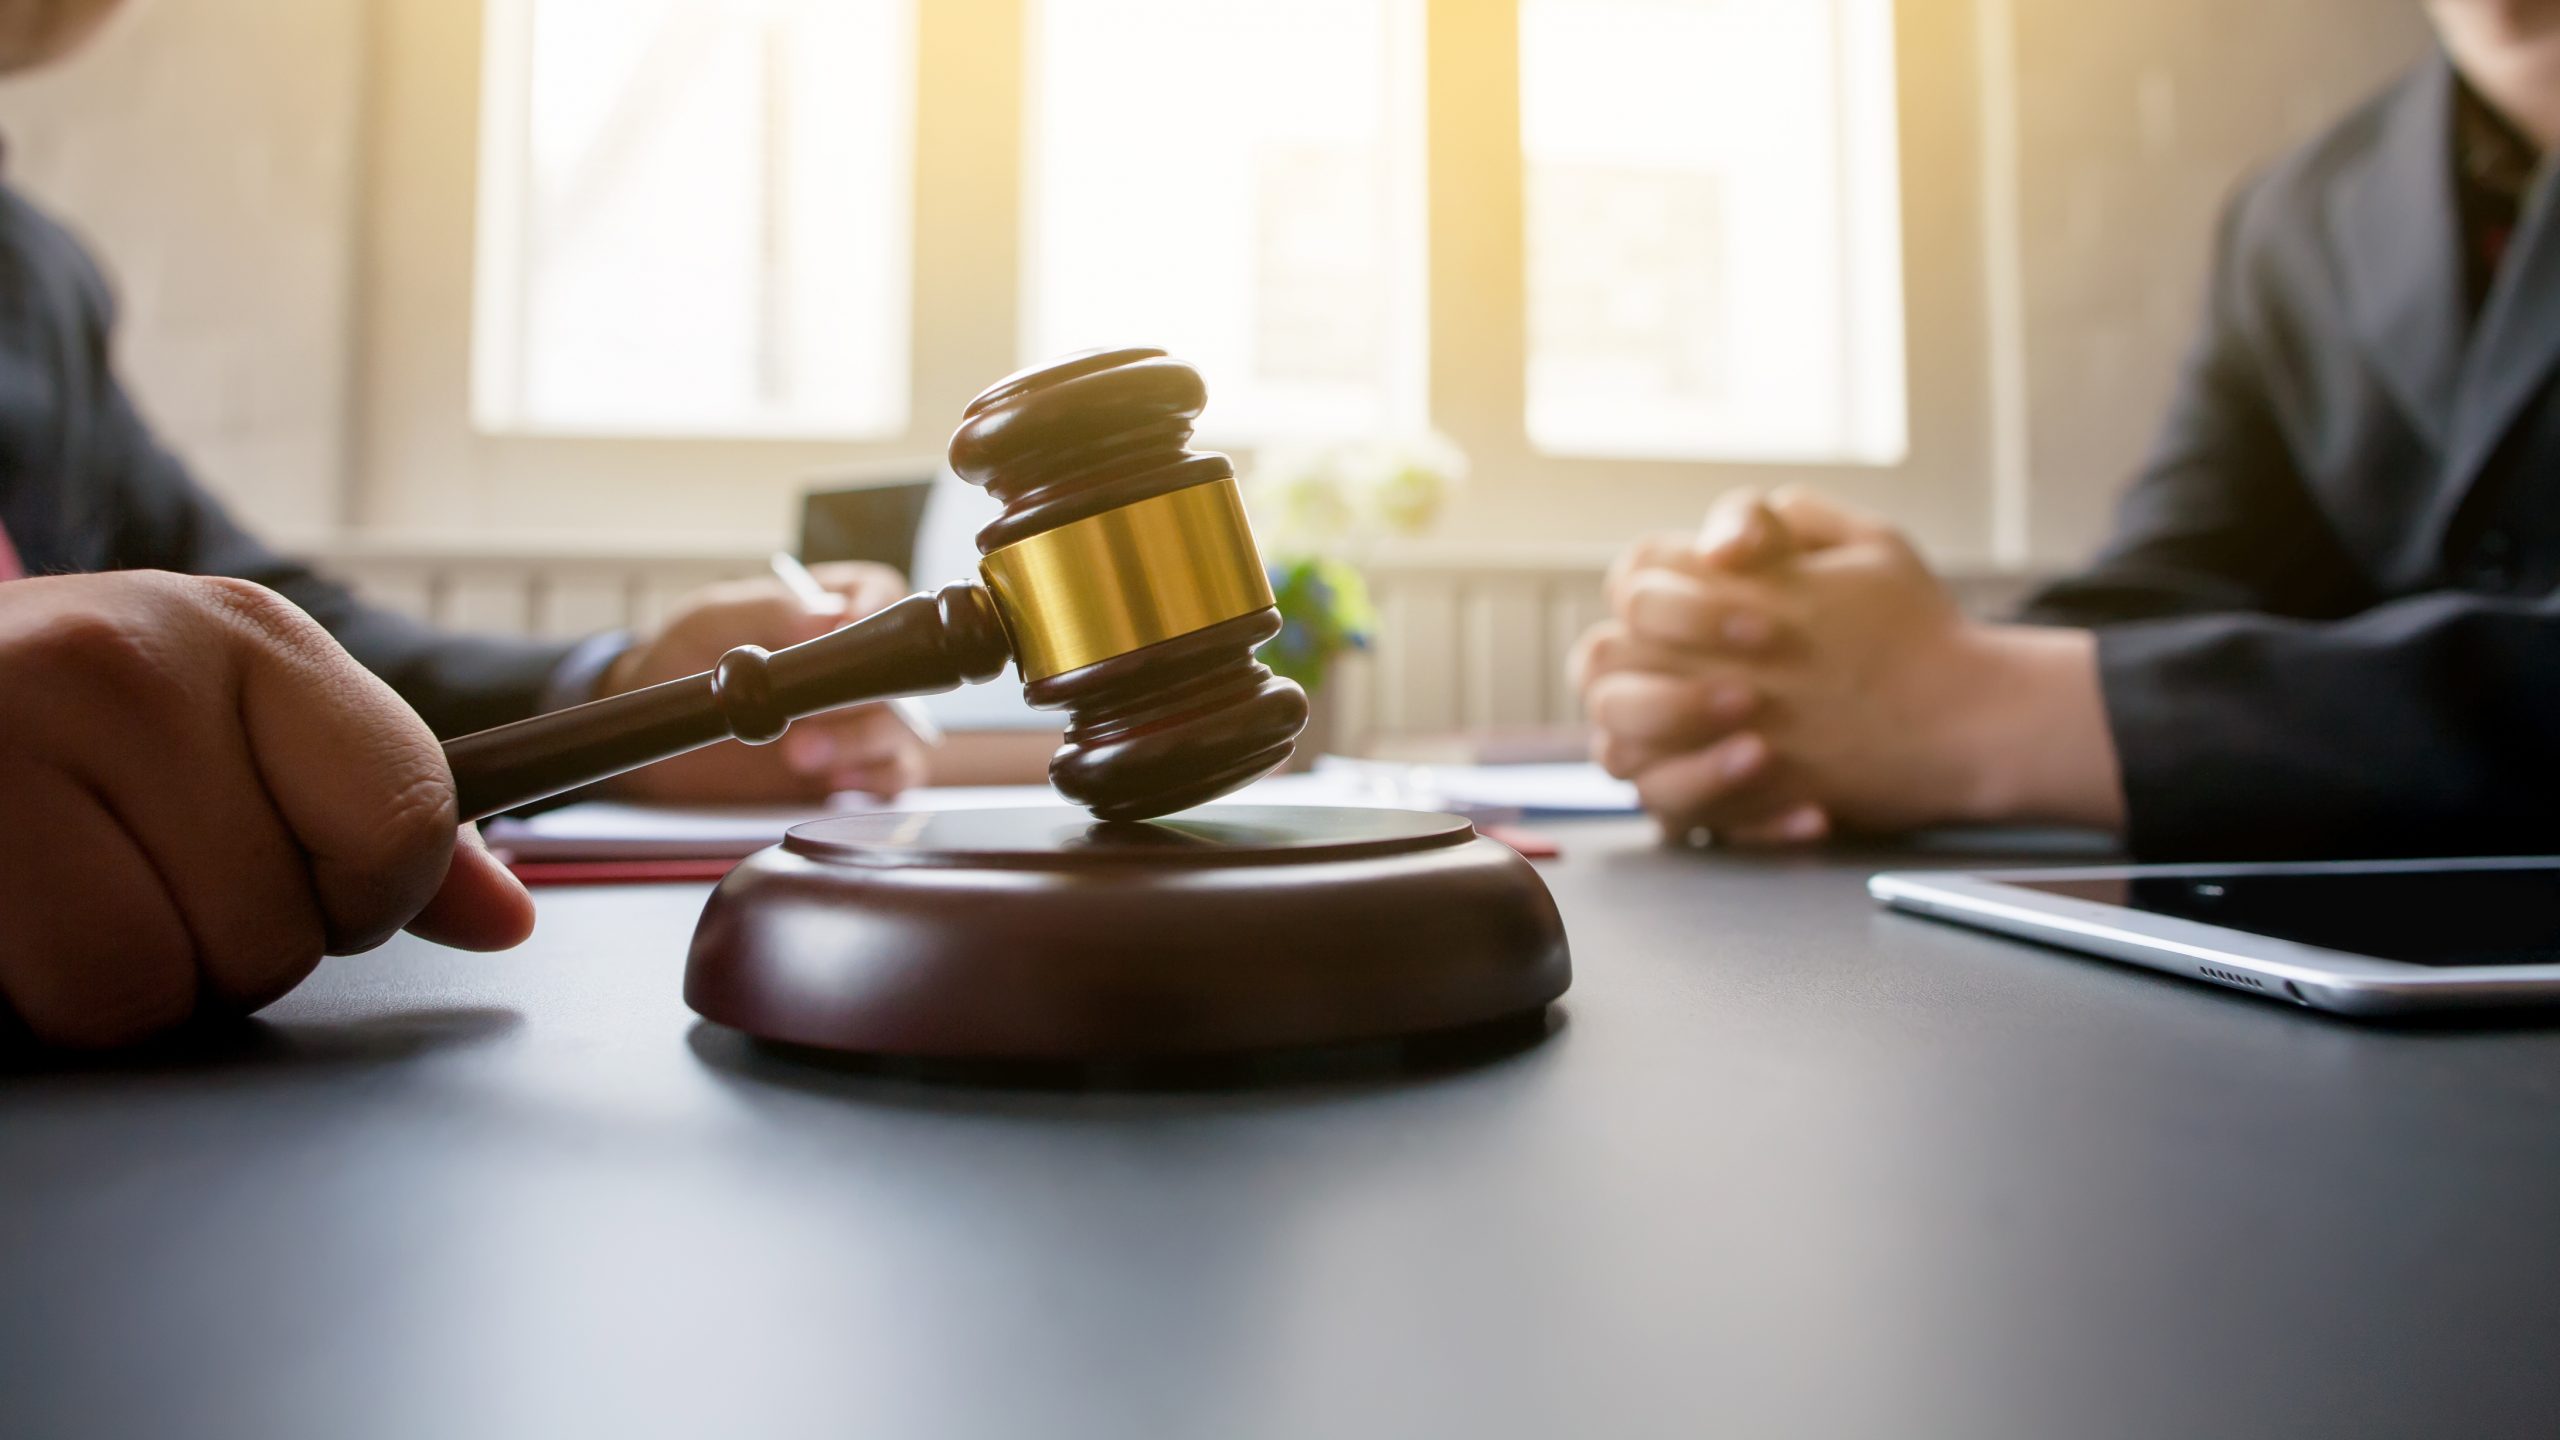 4 Ideas to Help Your Business Avoid Lawsuits